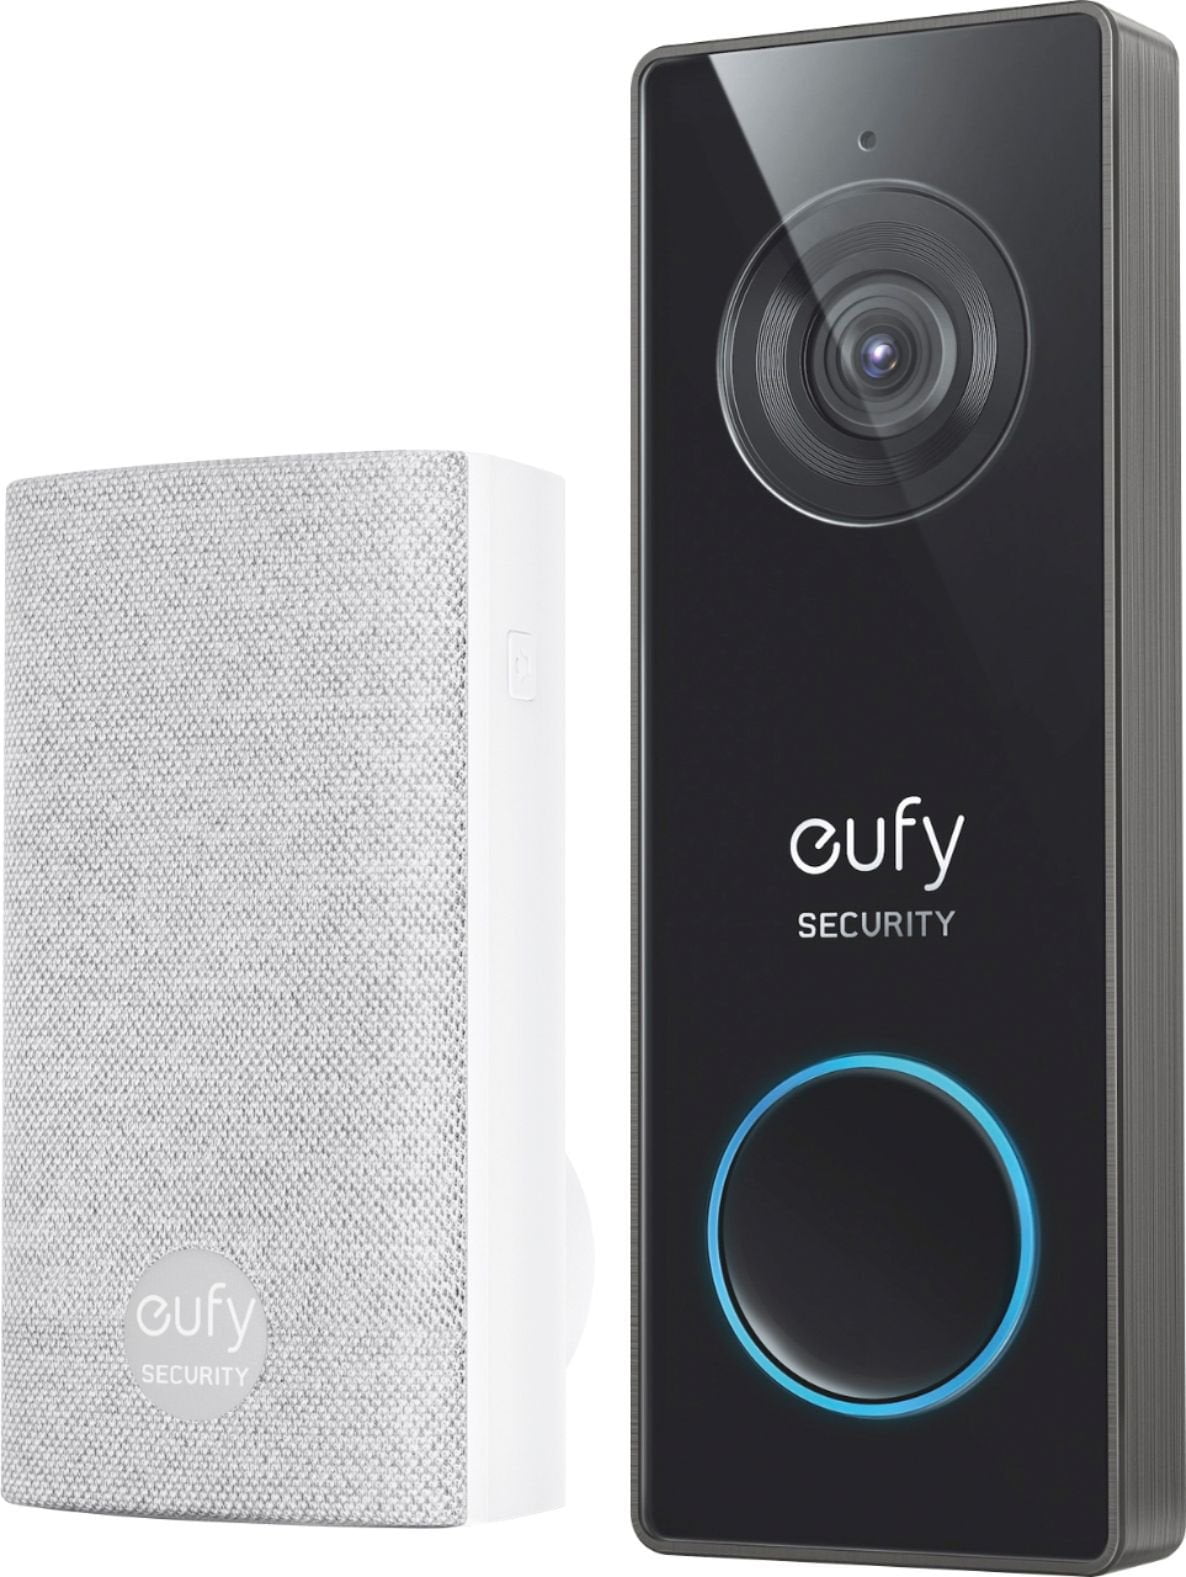 Updated Eufy Wired Doorbell